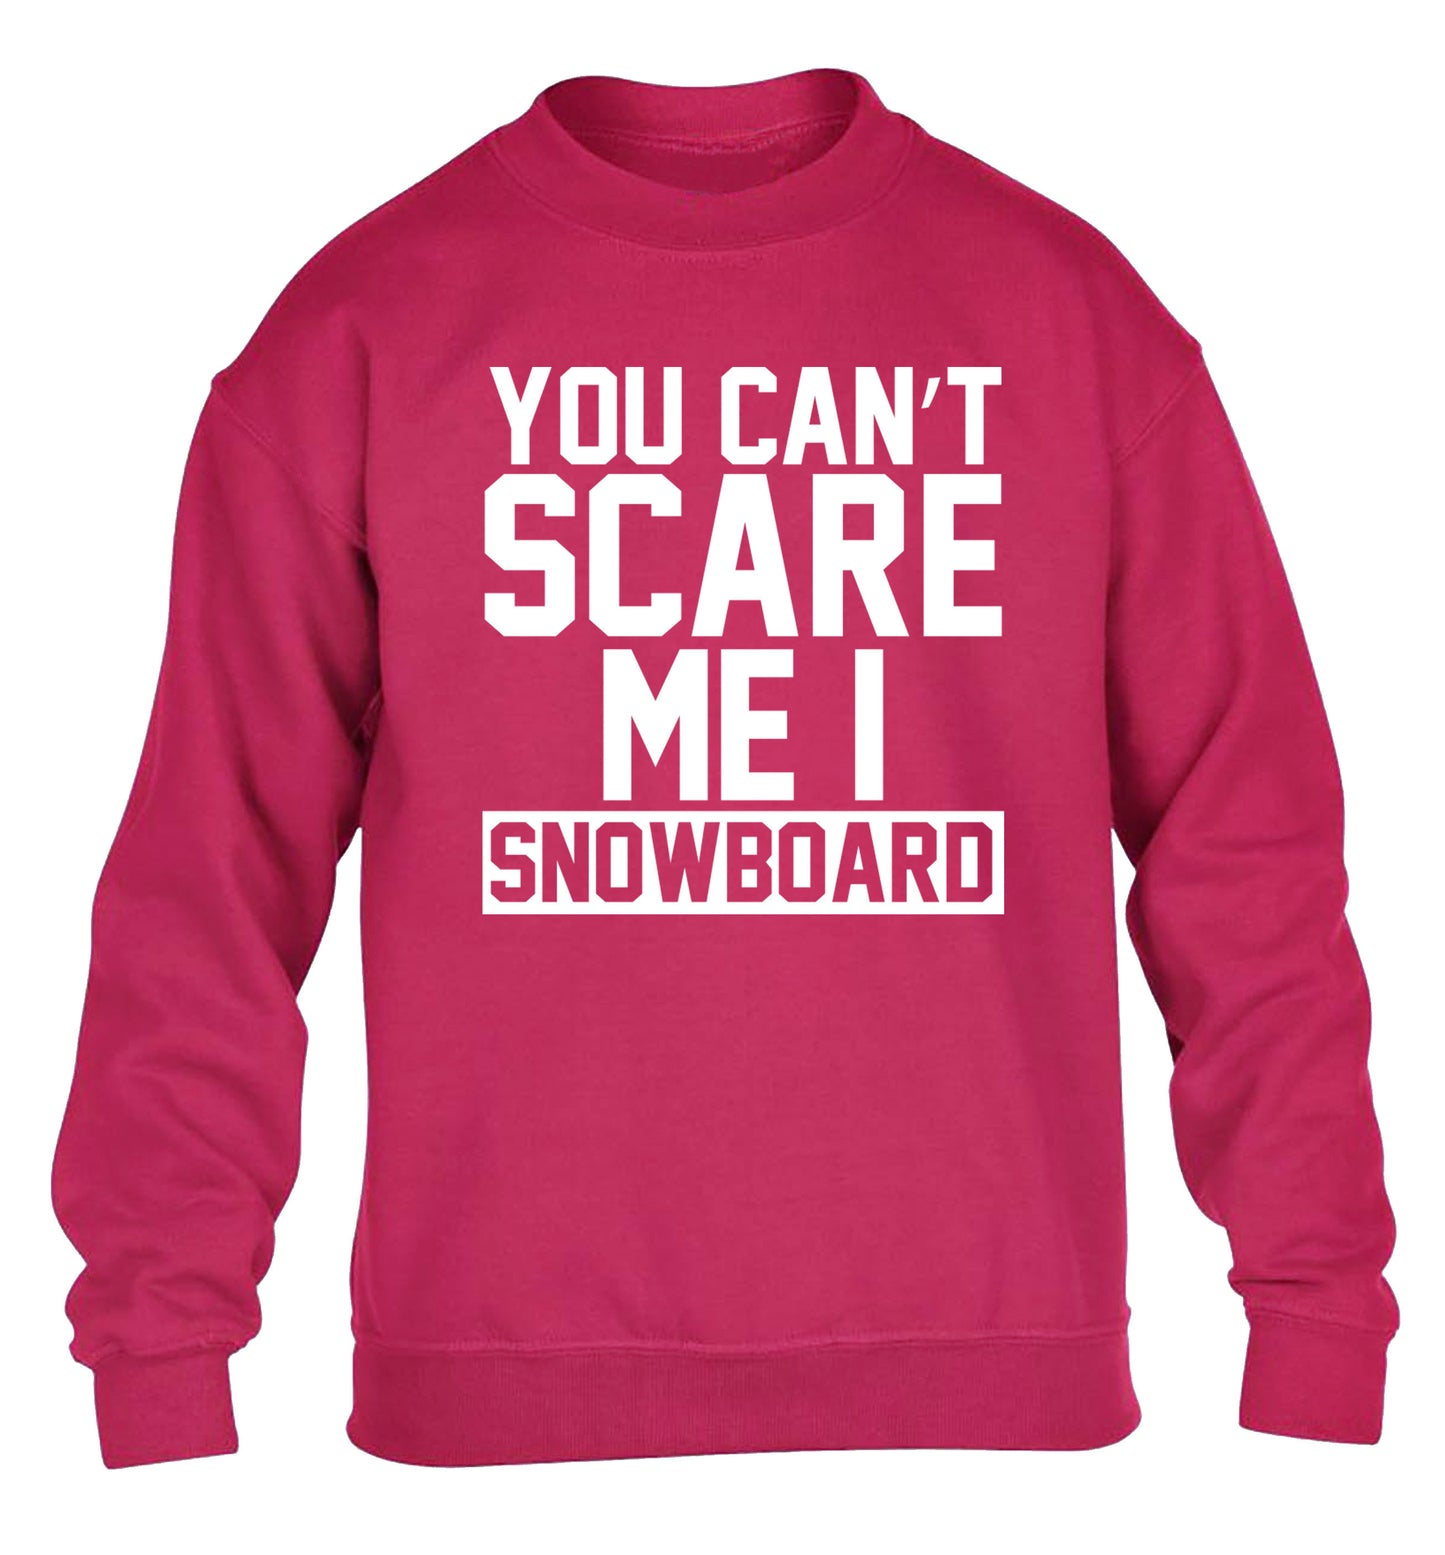 You can't scare me I snowboard children's pink sweater 12-14 Years